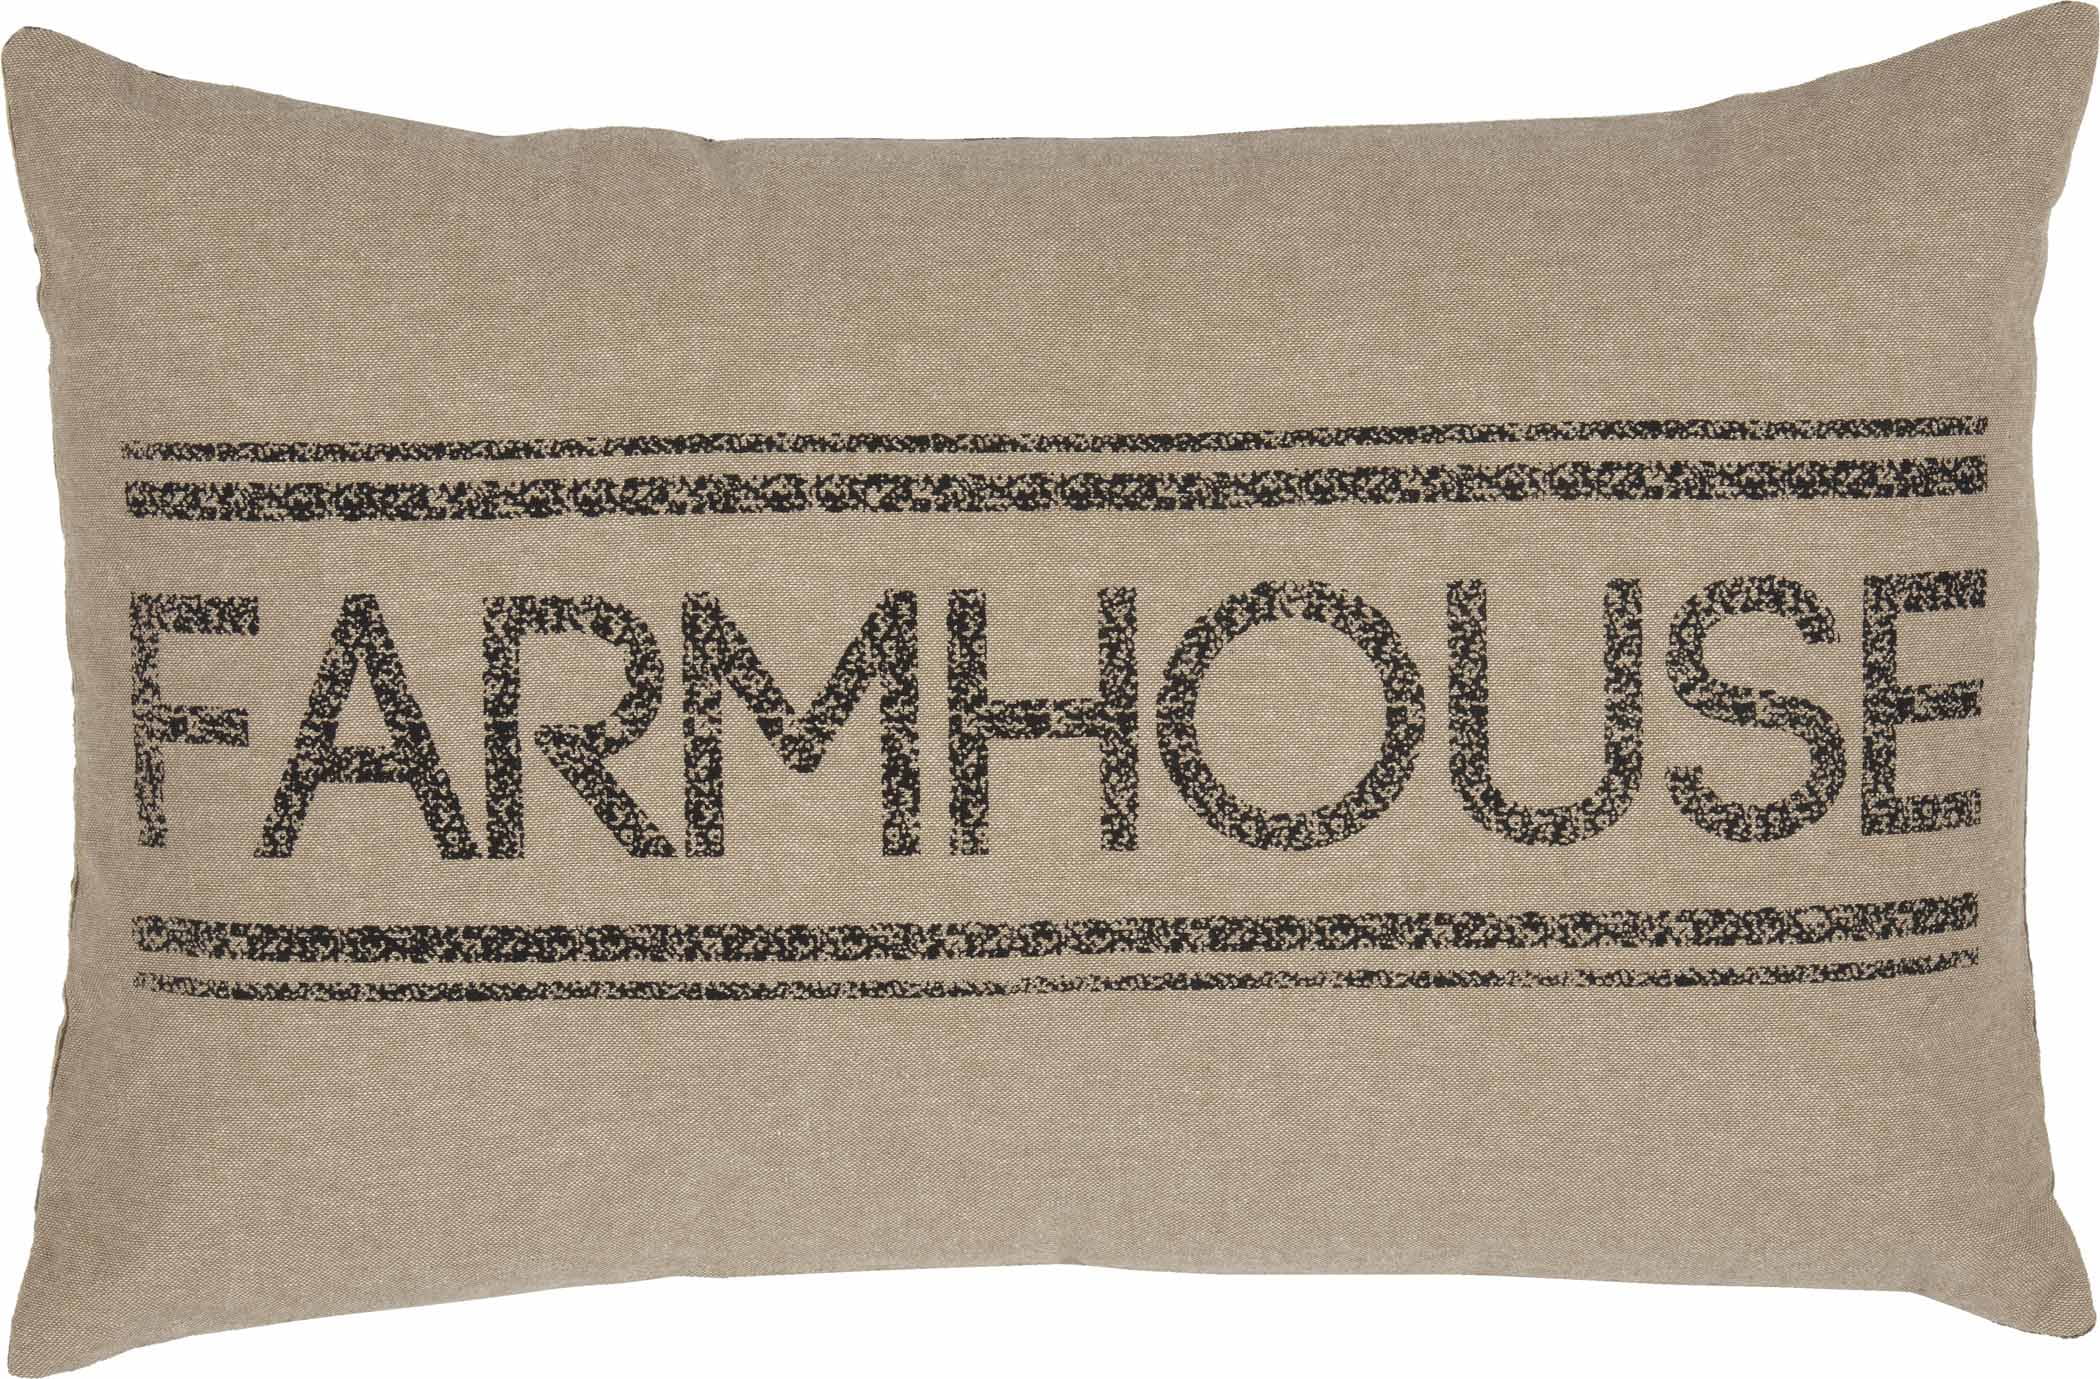 Farmhouse Throw Pillow 18x18 Sheep Sawyer Mill Black Embroidered White  Country VHC Brands